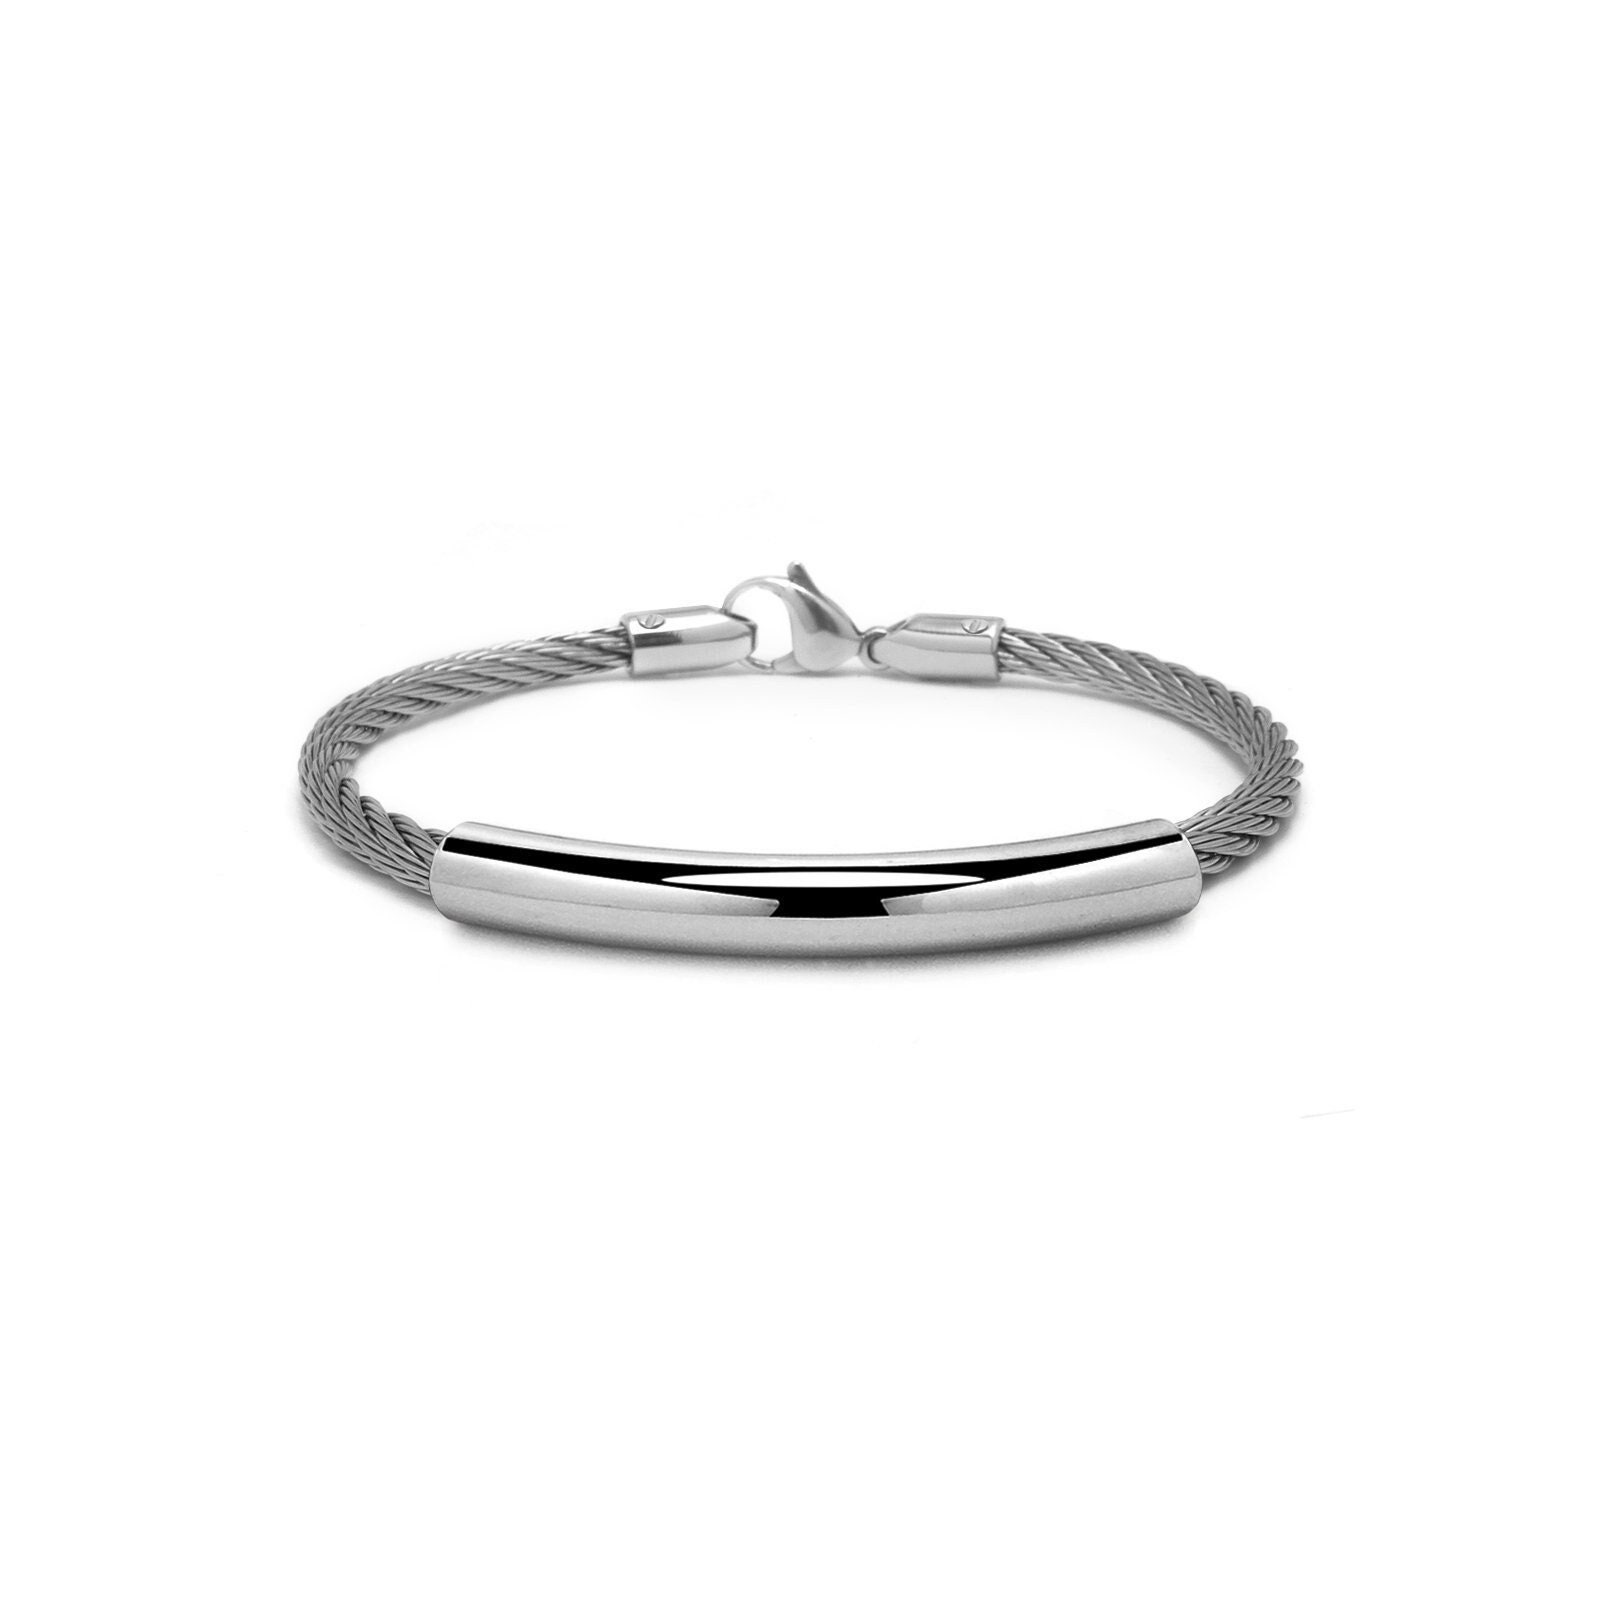 Amazon.com: Galis Rope Bracelet For Men - Premium Stainless Steel Bracelet  for Men, Silver Plated Non Tarnish Bracelet - Our Silver Rope Chain is  Stylish Anniversary & Birthday Gifts For Men 8.5” (